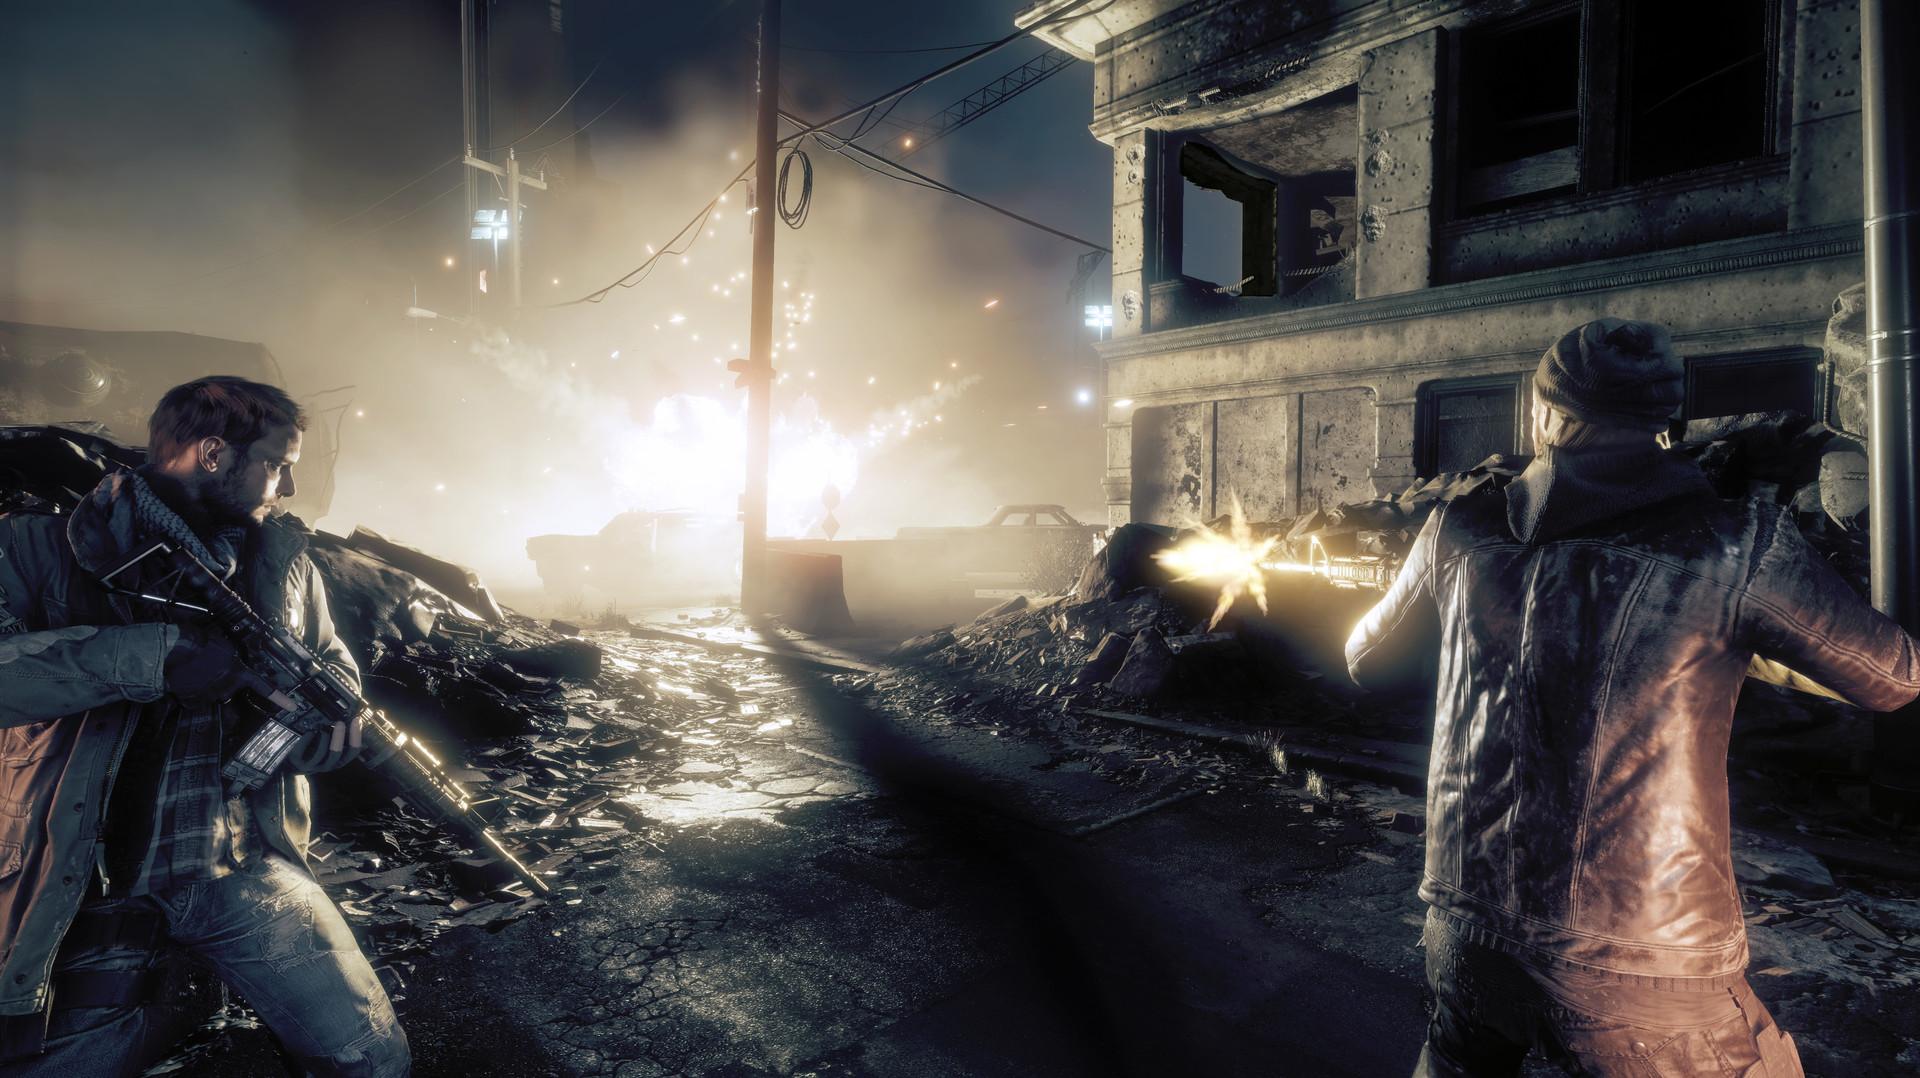 Screenshot №8 from game Homefront®: The Revolution